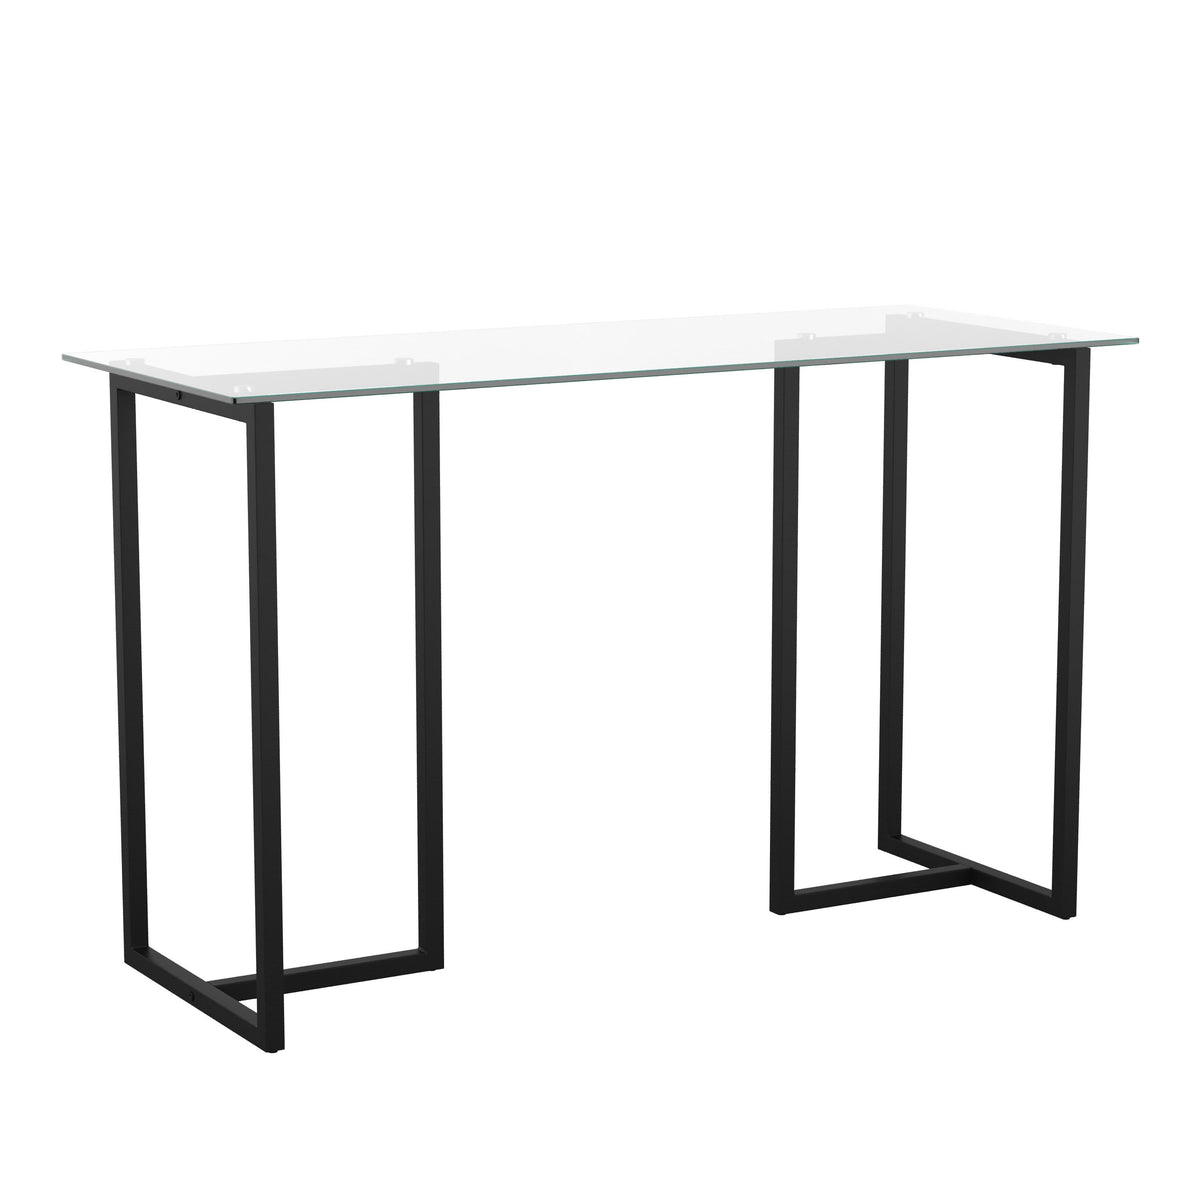 Clear Top/Oil Rubbed Bronze Frame |#| Tempered Glass Top Home Office Desk with Steel Frame in Oil Rubbed Bronze